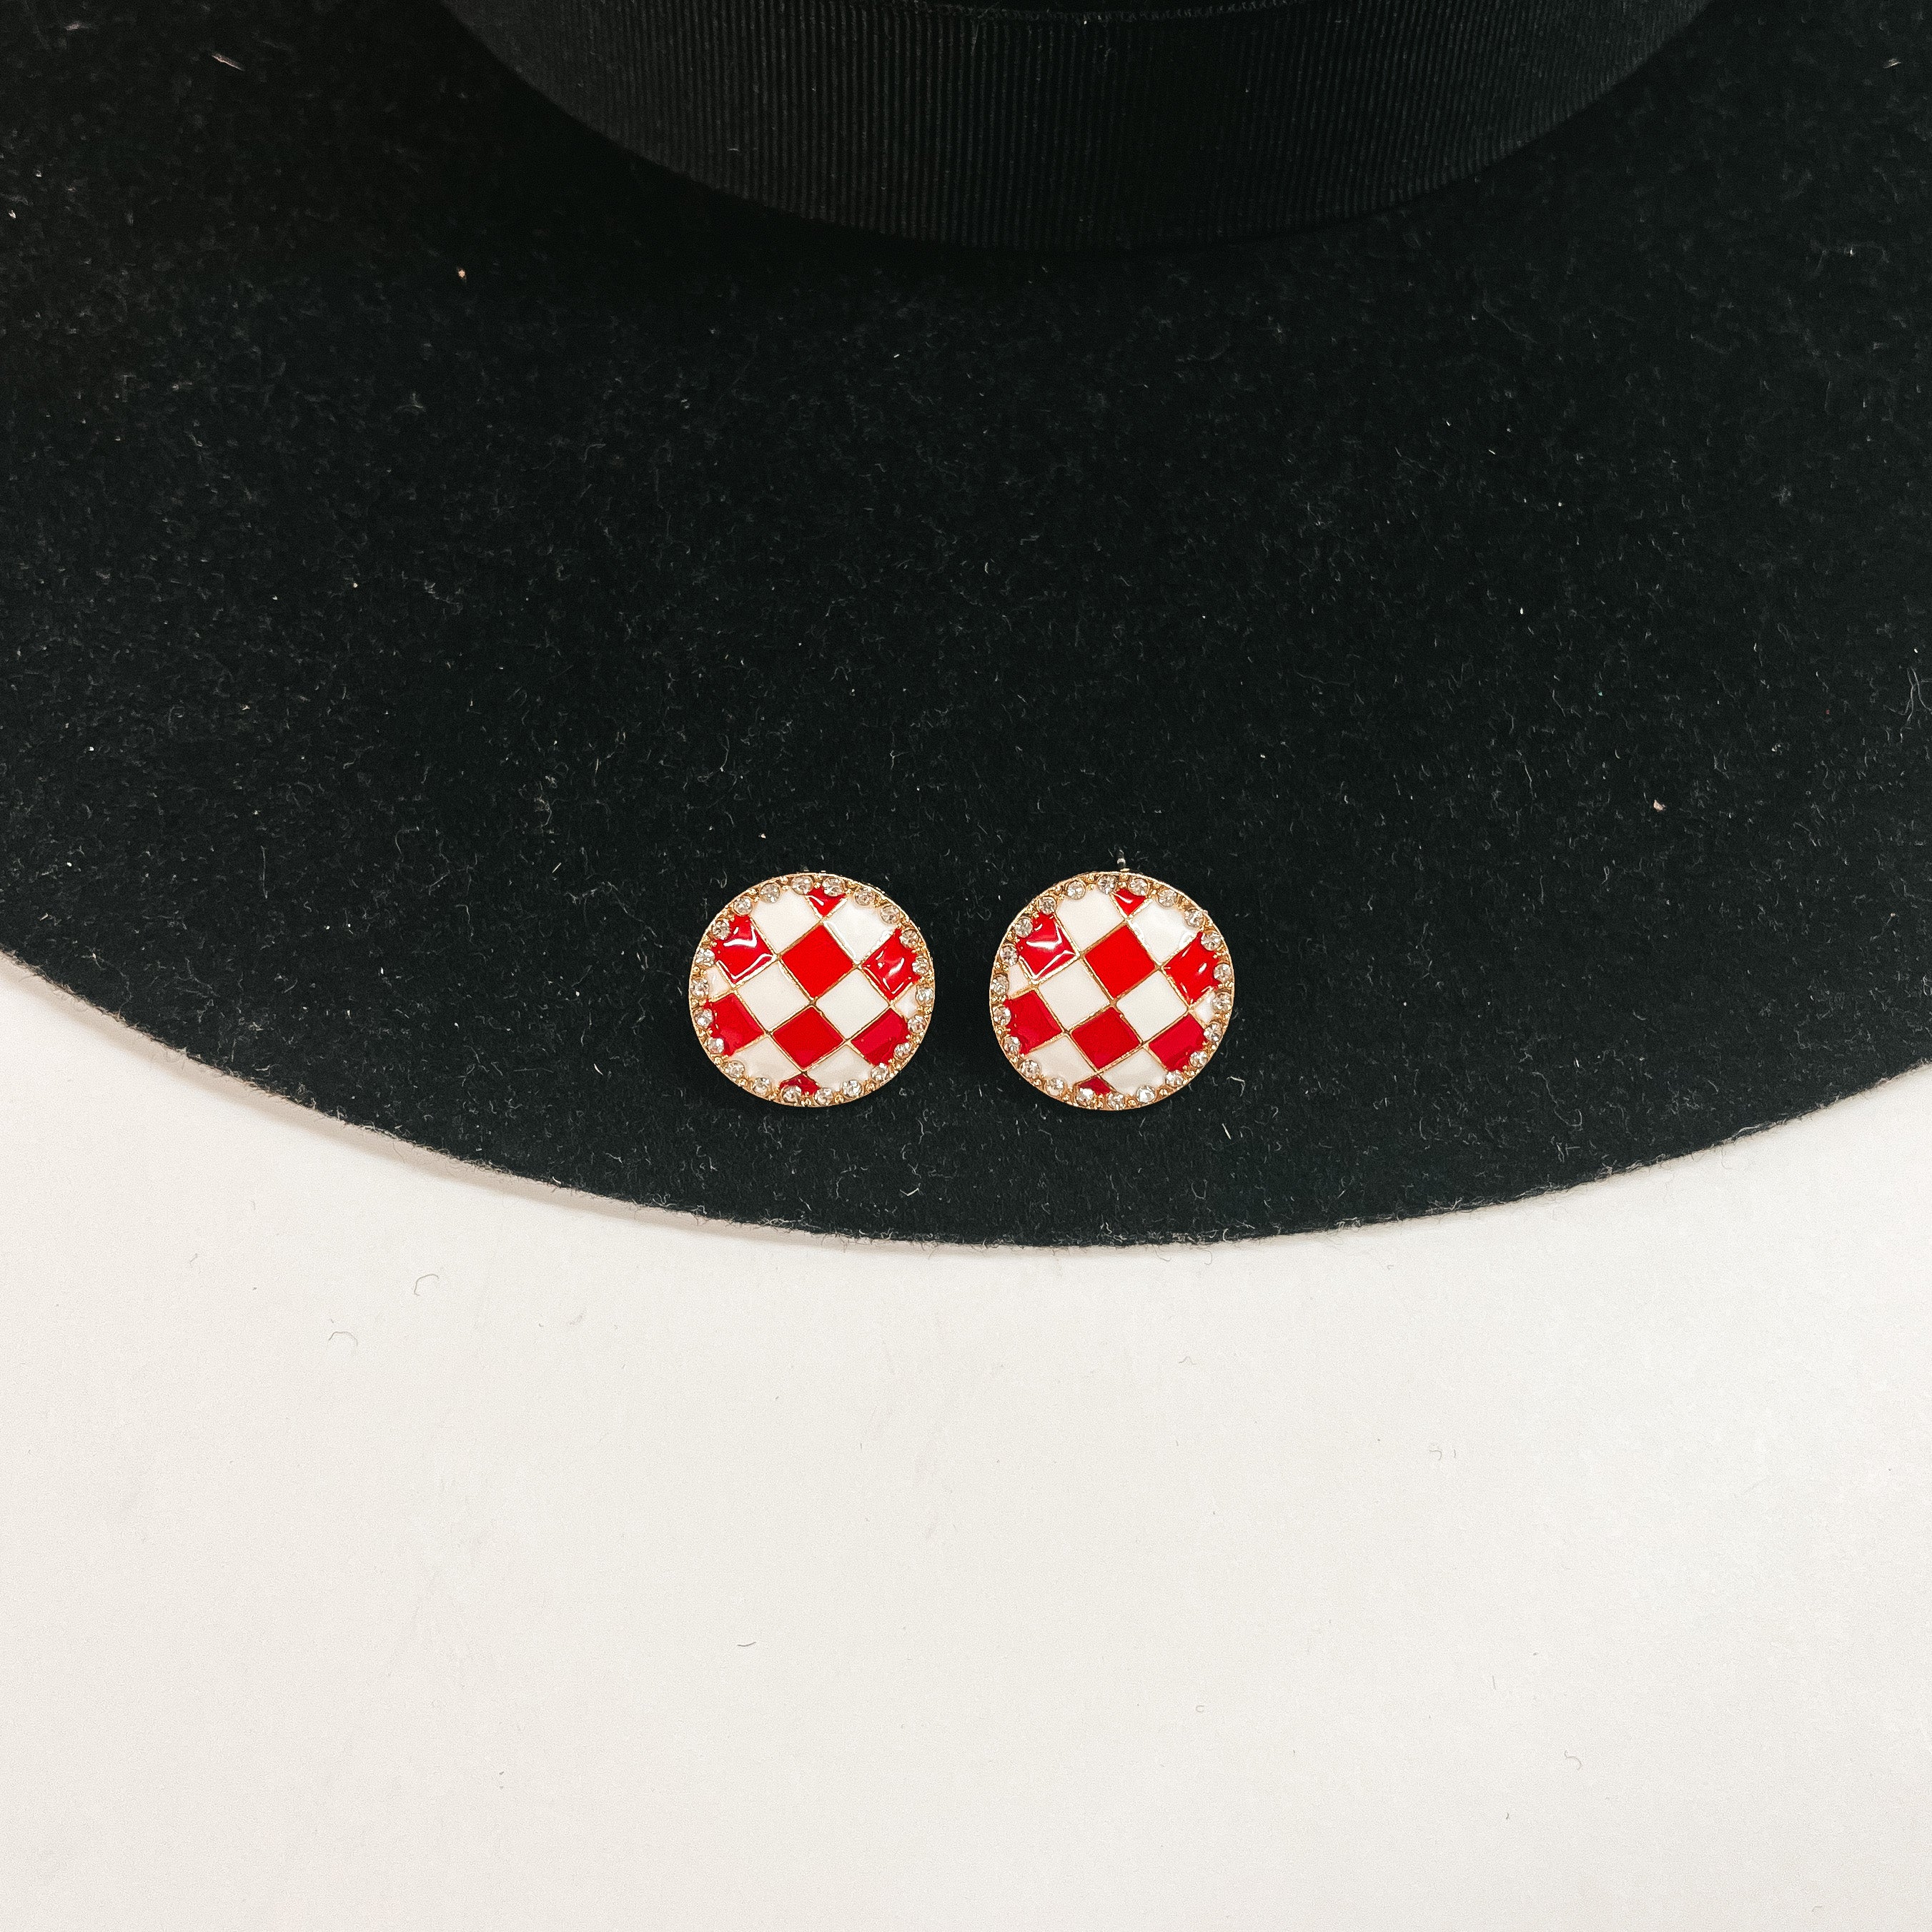 This is a pair of checkered patterned stud earrings in white/red in a gold  setting with clear crystals all around. This pair of earrings is laying on a  black felt hat brim and on a white background.